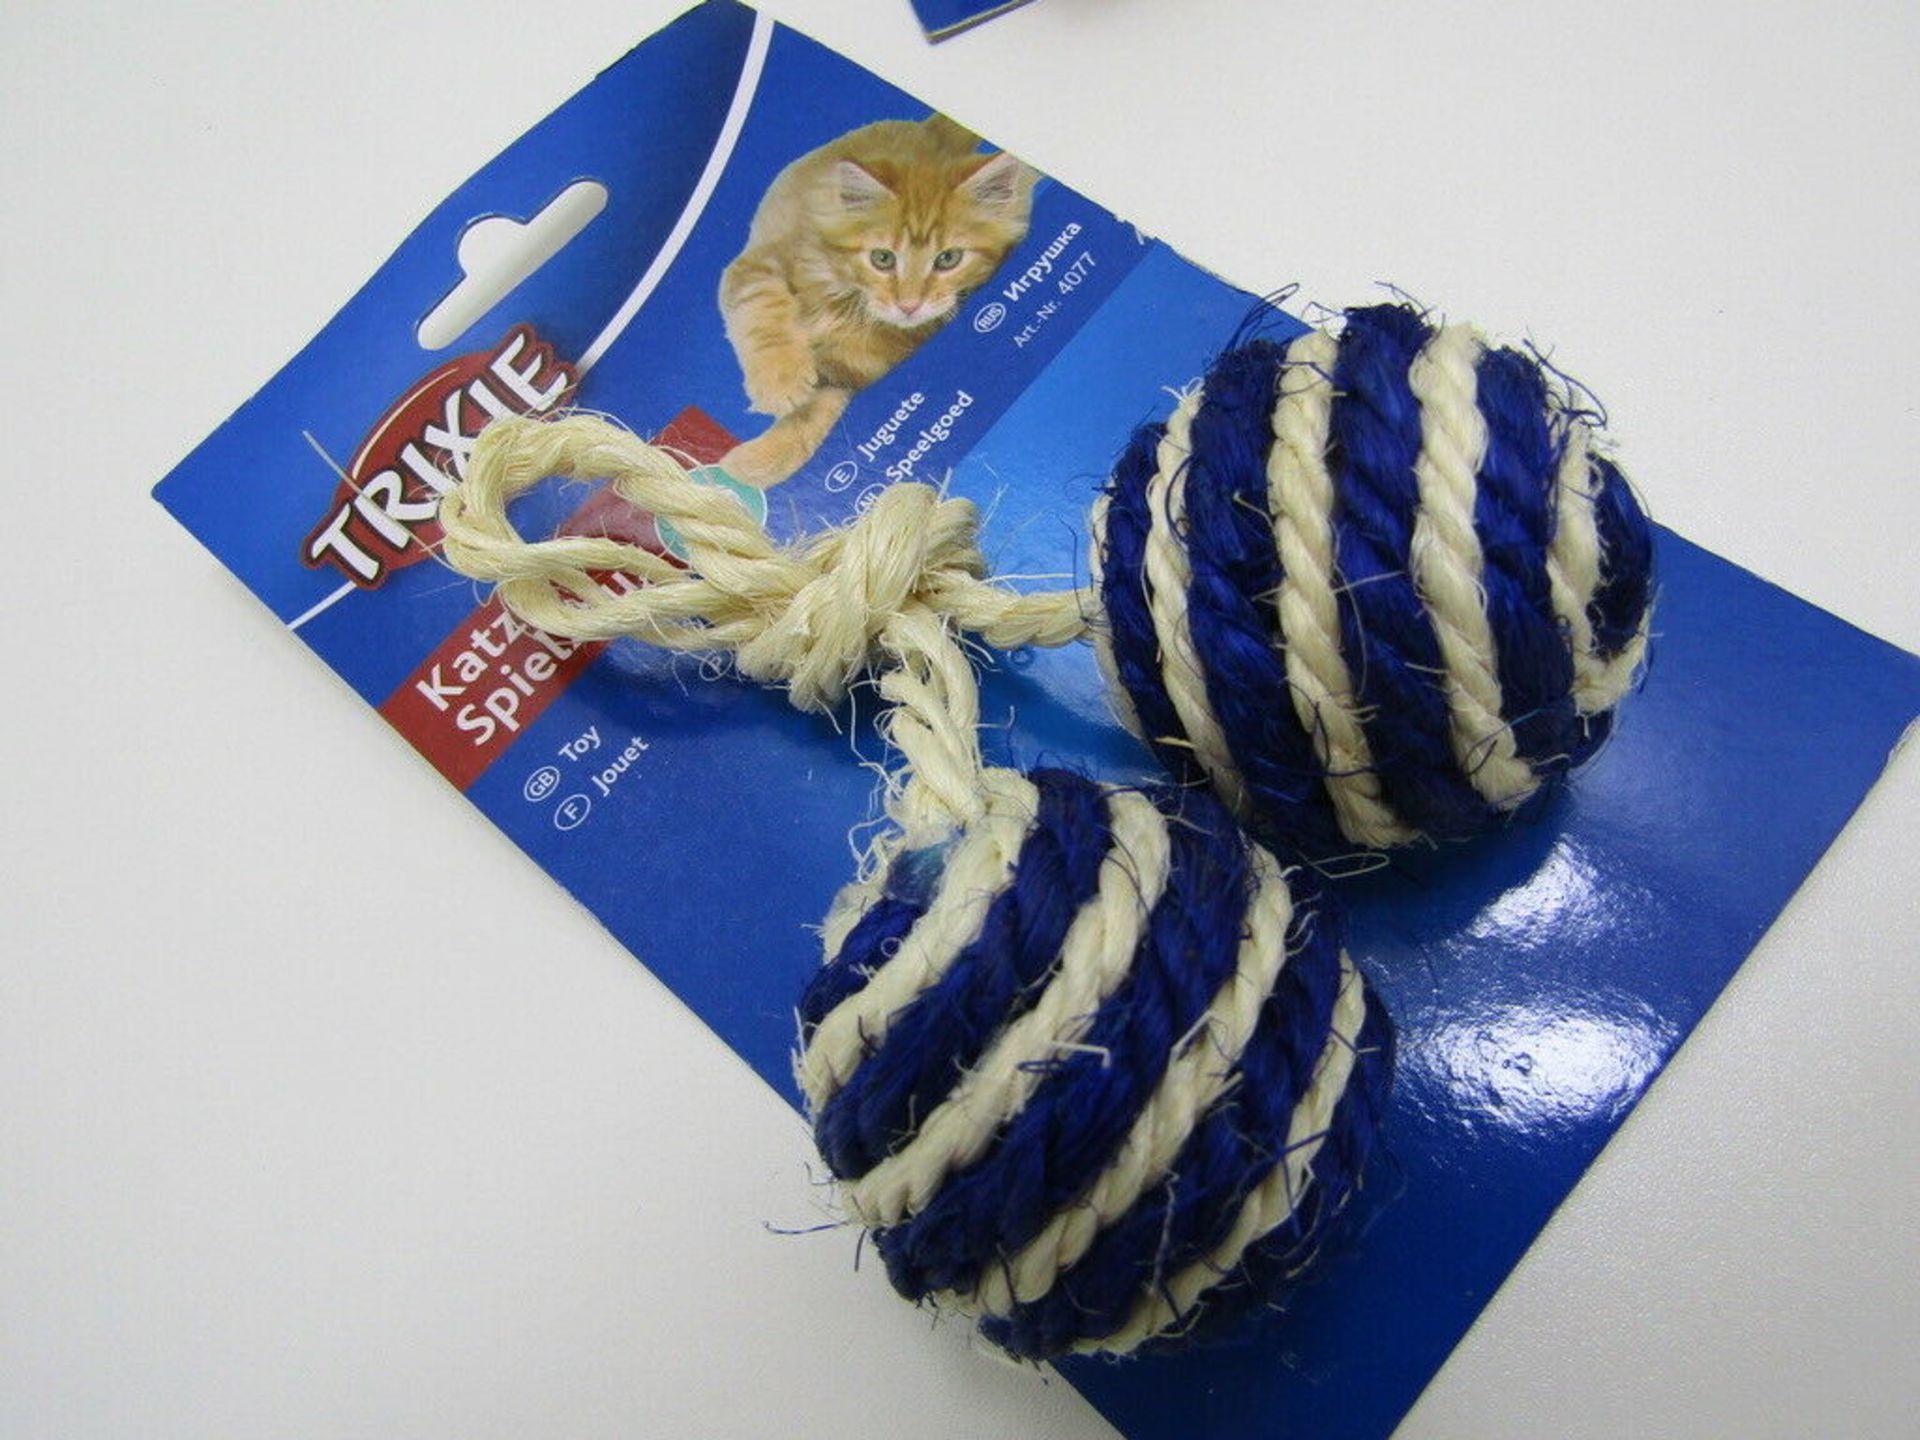 20 x Trixie Cat Toy. Double Balls. Rattle Scratch Rope. no vat on hammer.You will get 20 of these in